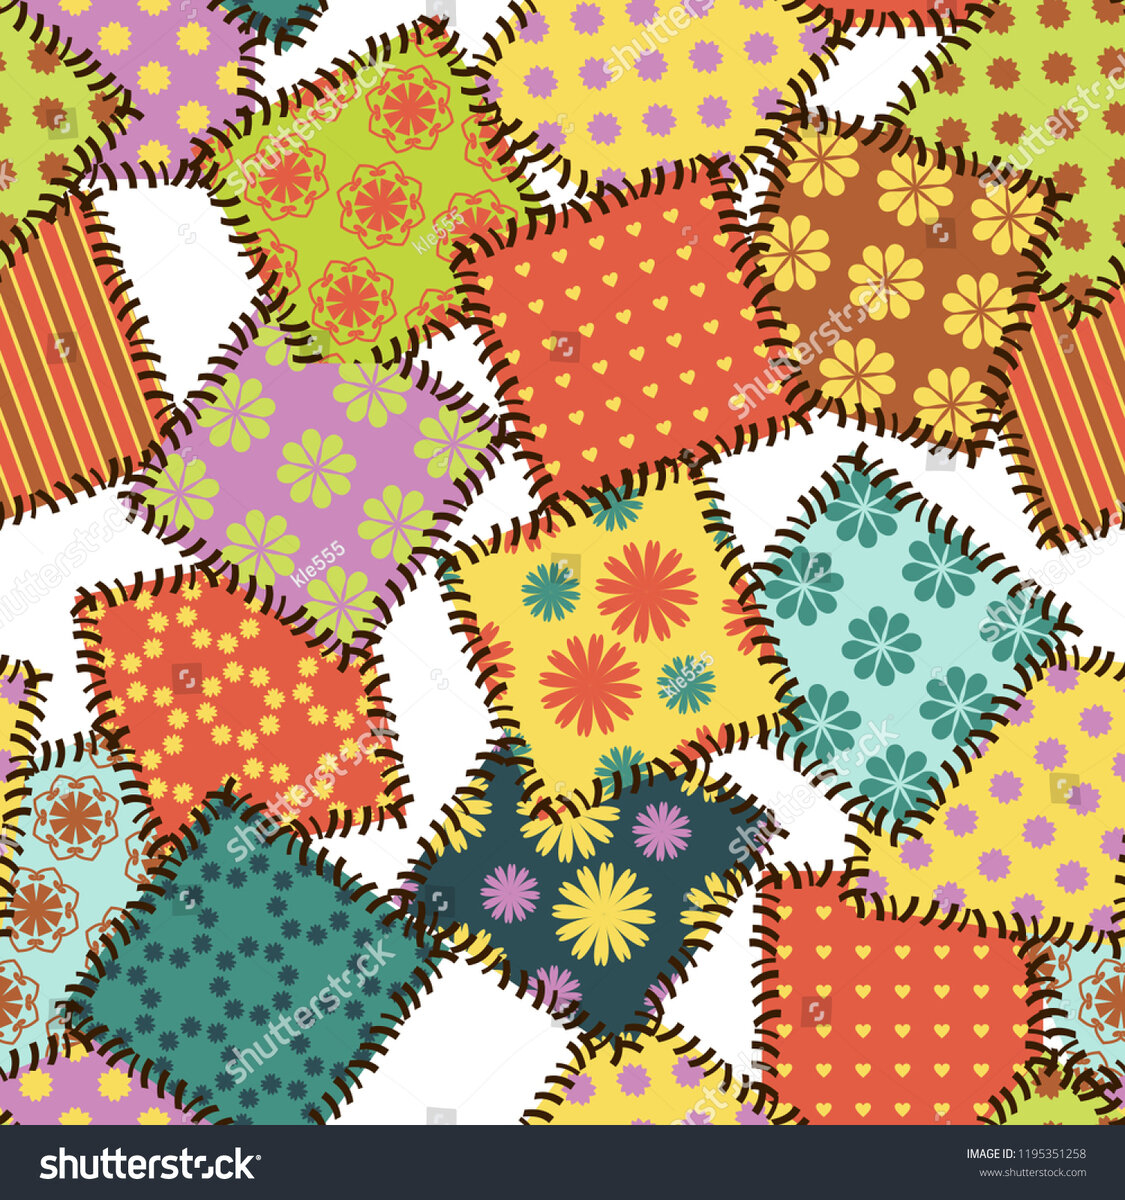 Craft Patch background. Different patterns